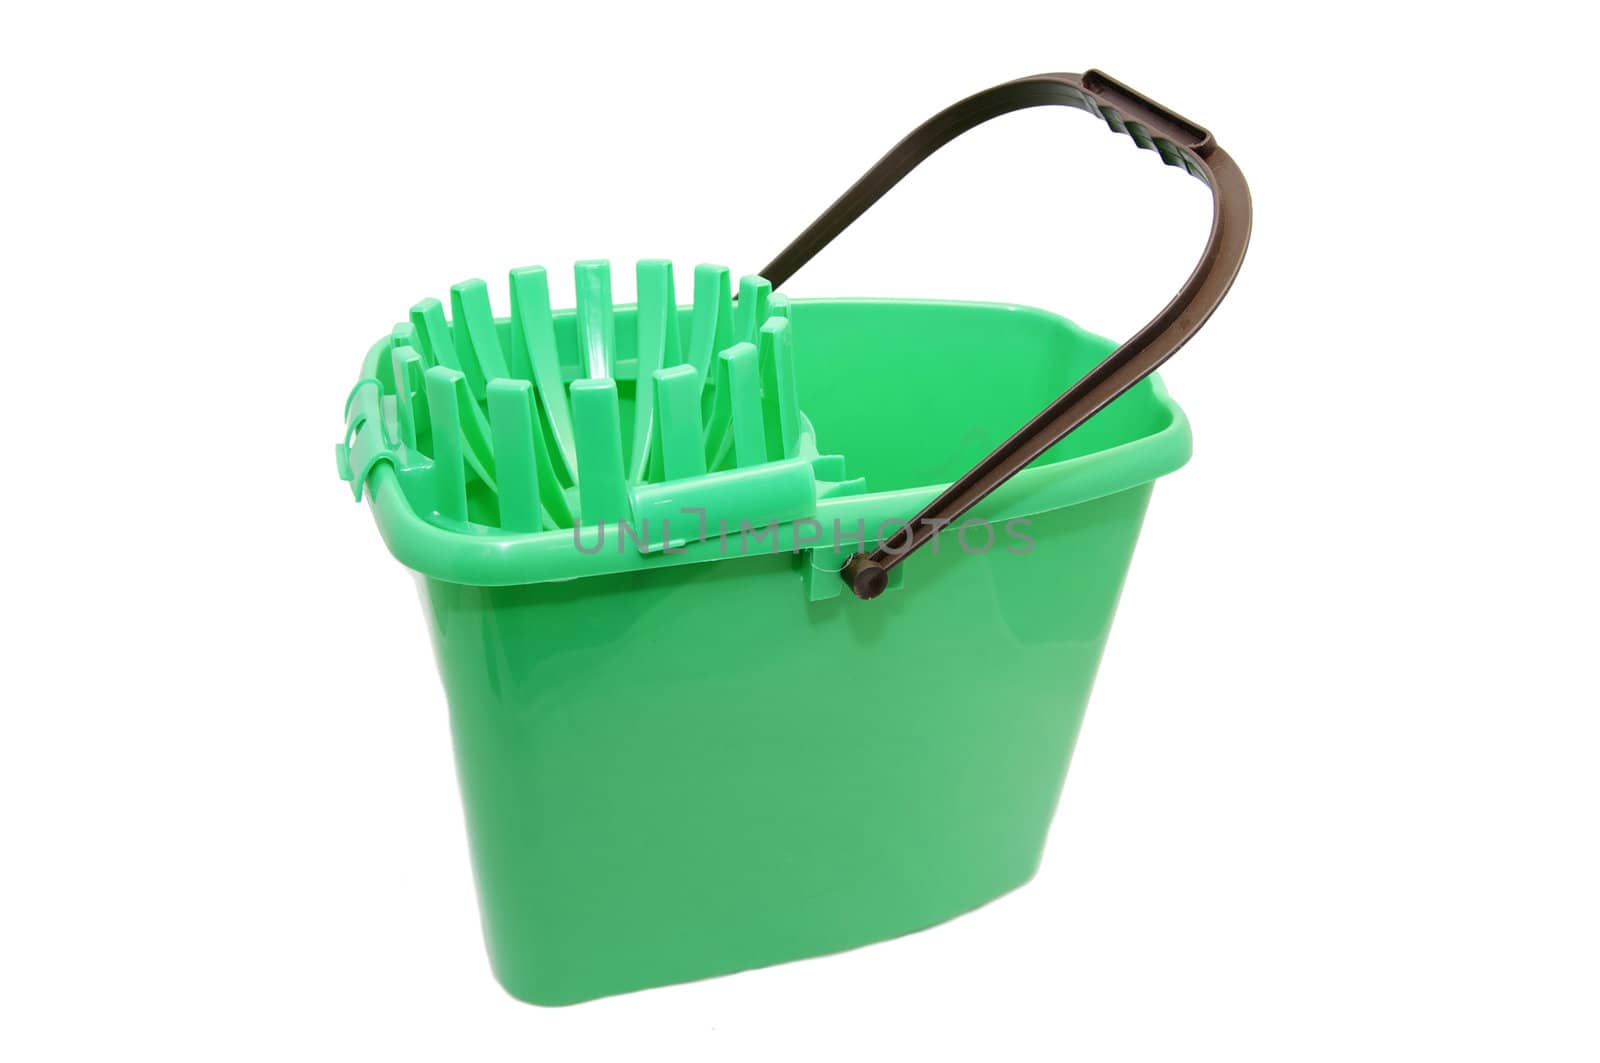 green bucket by Lester120